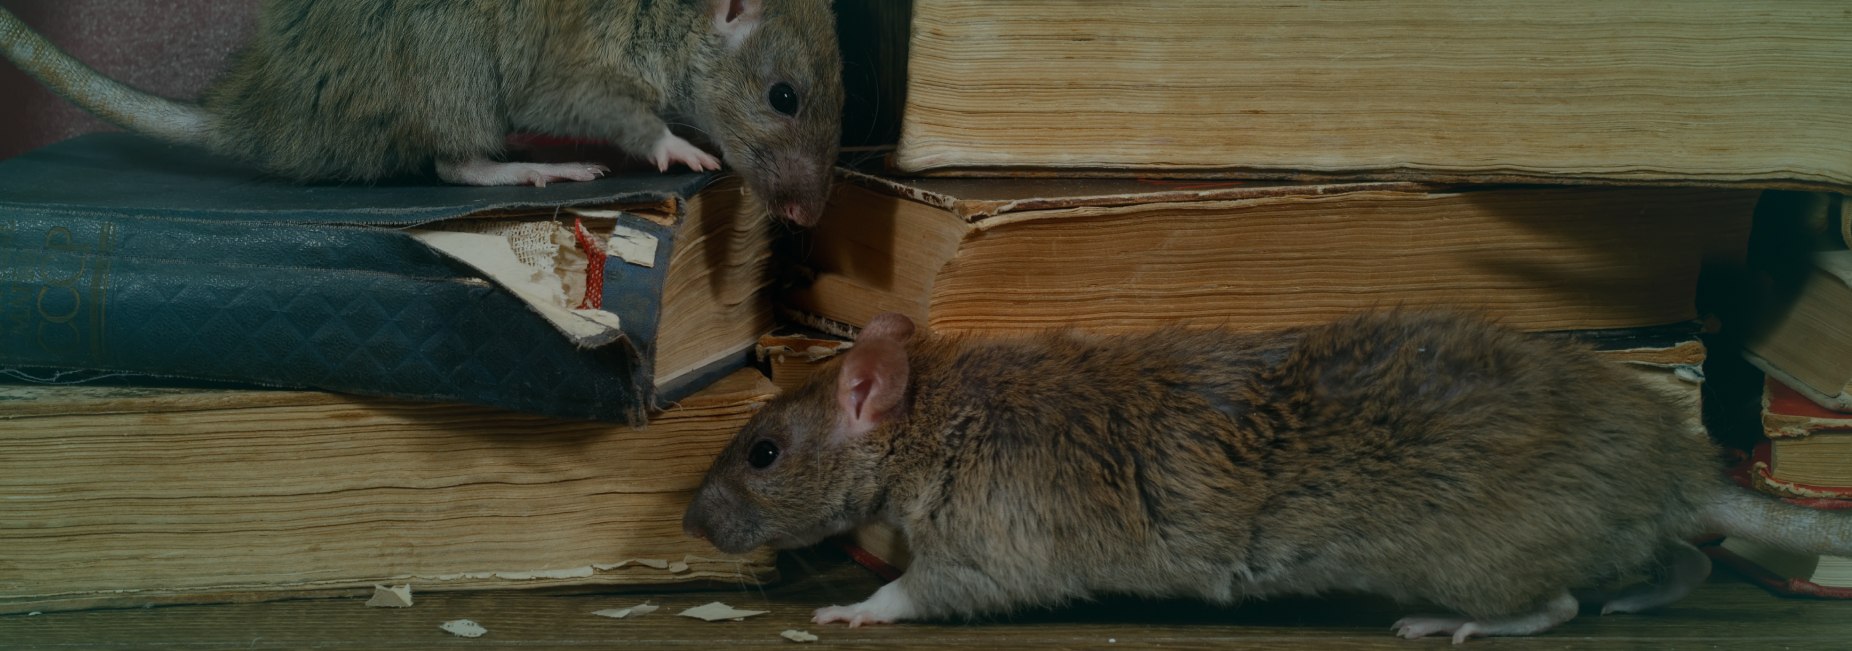 Close up two rat climbs old books surfside beach sc